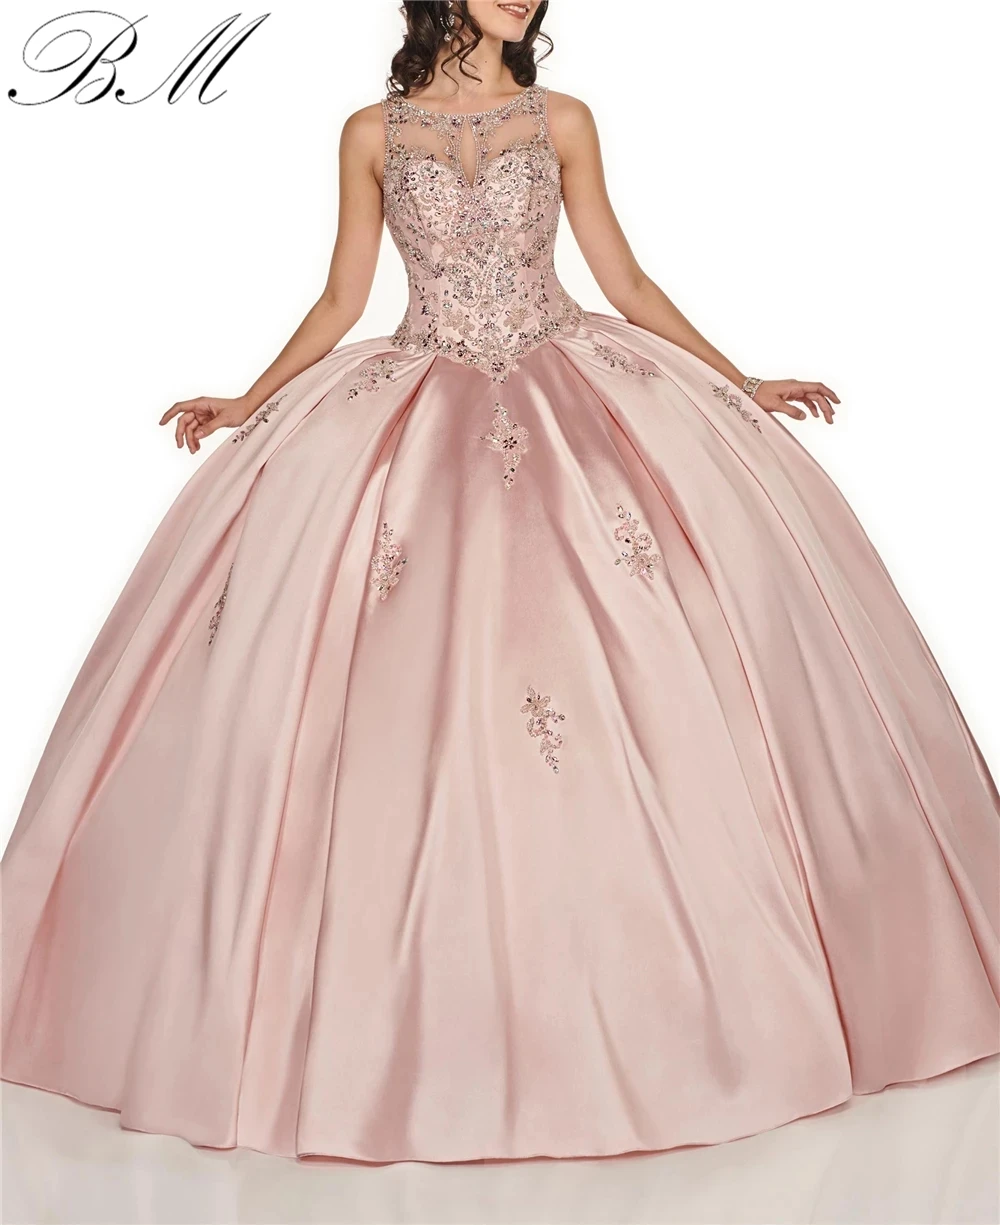 

New Ball Gown Quinceanera Dresses 2021 Satin Appliques Crystals Court Train Lace-Up Sweet 16 Dress Vestidos De 15 Anos